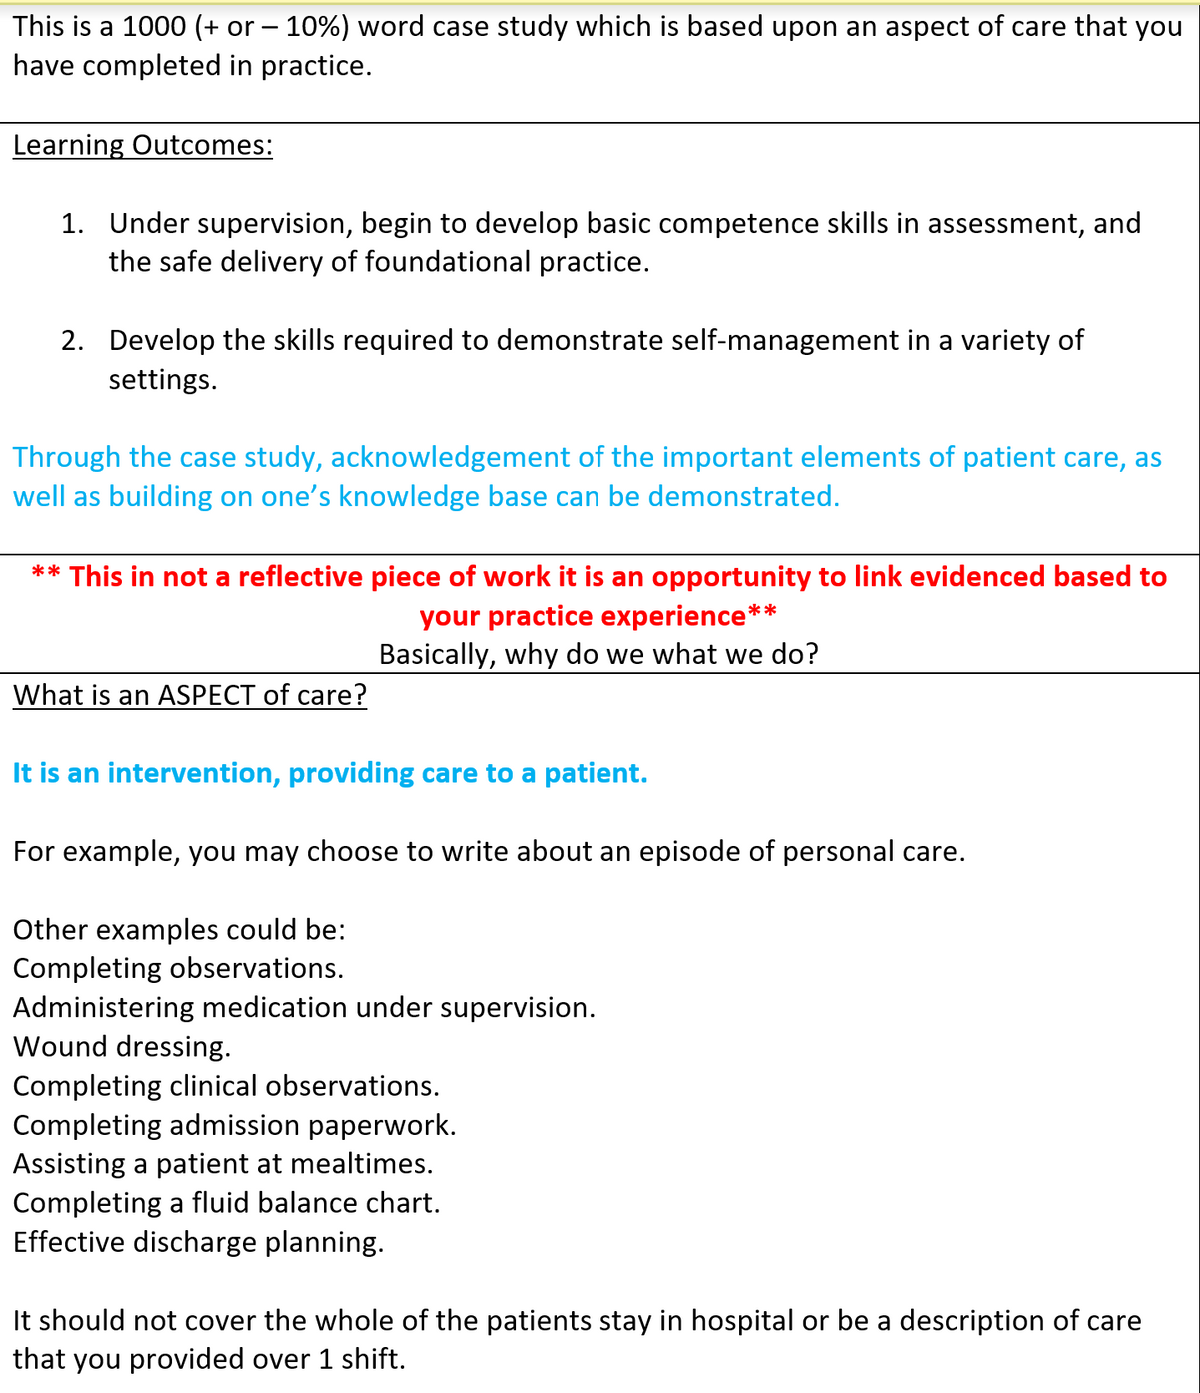 This is a 1000 (+ or − 10%) word case study which is based upon an aspect of care that you
have completed in practice.
Learning Outcomes:
1. Under supervision, begin to develop basic competence skills in assessment, and
the safe delivery of foundational practice.
2. Develop the skills required to demonstrate self-management in a variety of
settings.
Through the case study, acknowledgement of the important elements of patient care, as
well as building on one's knowledge base can be demonstrated.
** This in not a reflective piece of work it is an opportunity to link evidenced based to
your practice experience**
Basically, why do we what we do?
What is an ASPECT of care?
It is an intervention, providing care to a patient.
For example, you may choose to write about an episode of personal care.
Other examples could be:
Completing observations.
Administering medication under supervision.
Wound dressing.
Completing clinical observations.
Completing admission paperwork.
Assisting a patient at mealtimes.
Completing a fluid balance chart.
Effective discharge planning.
It should not cover the whole of the patients stay in hospital or be a description of care
that you provided over 1 shift.